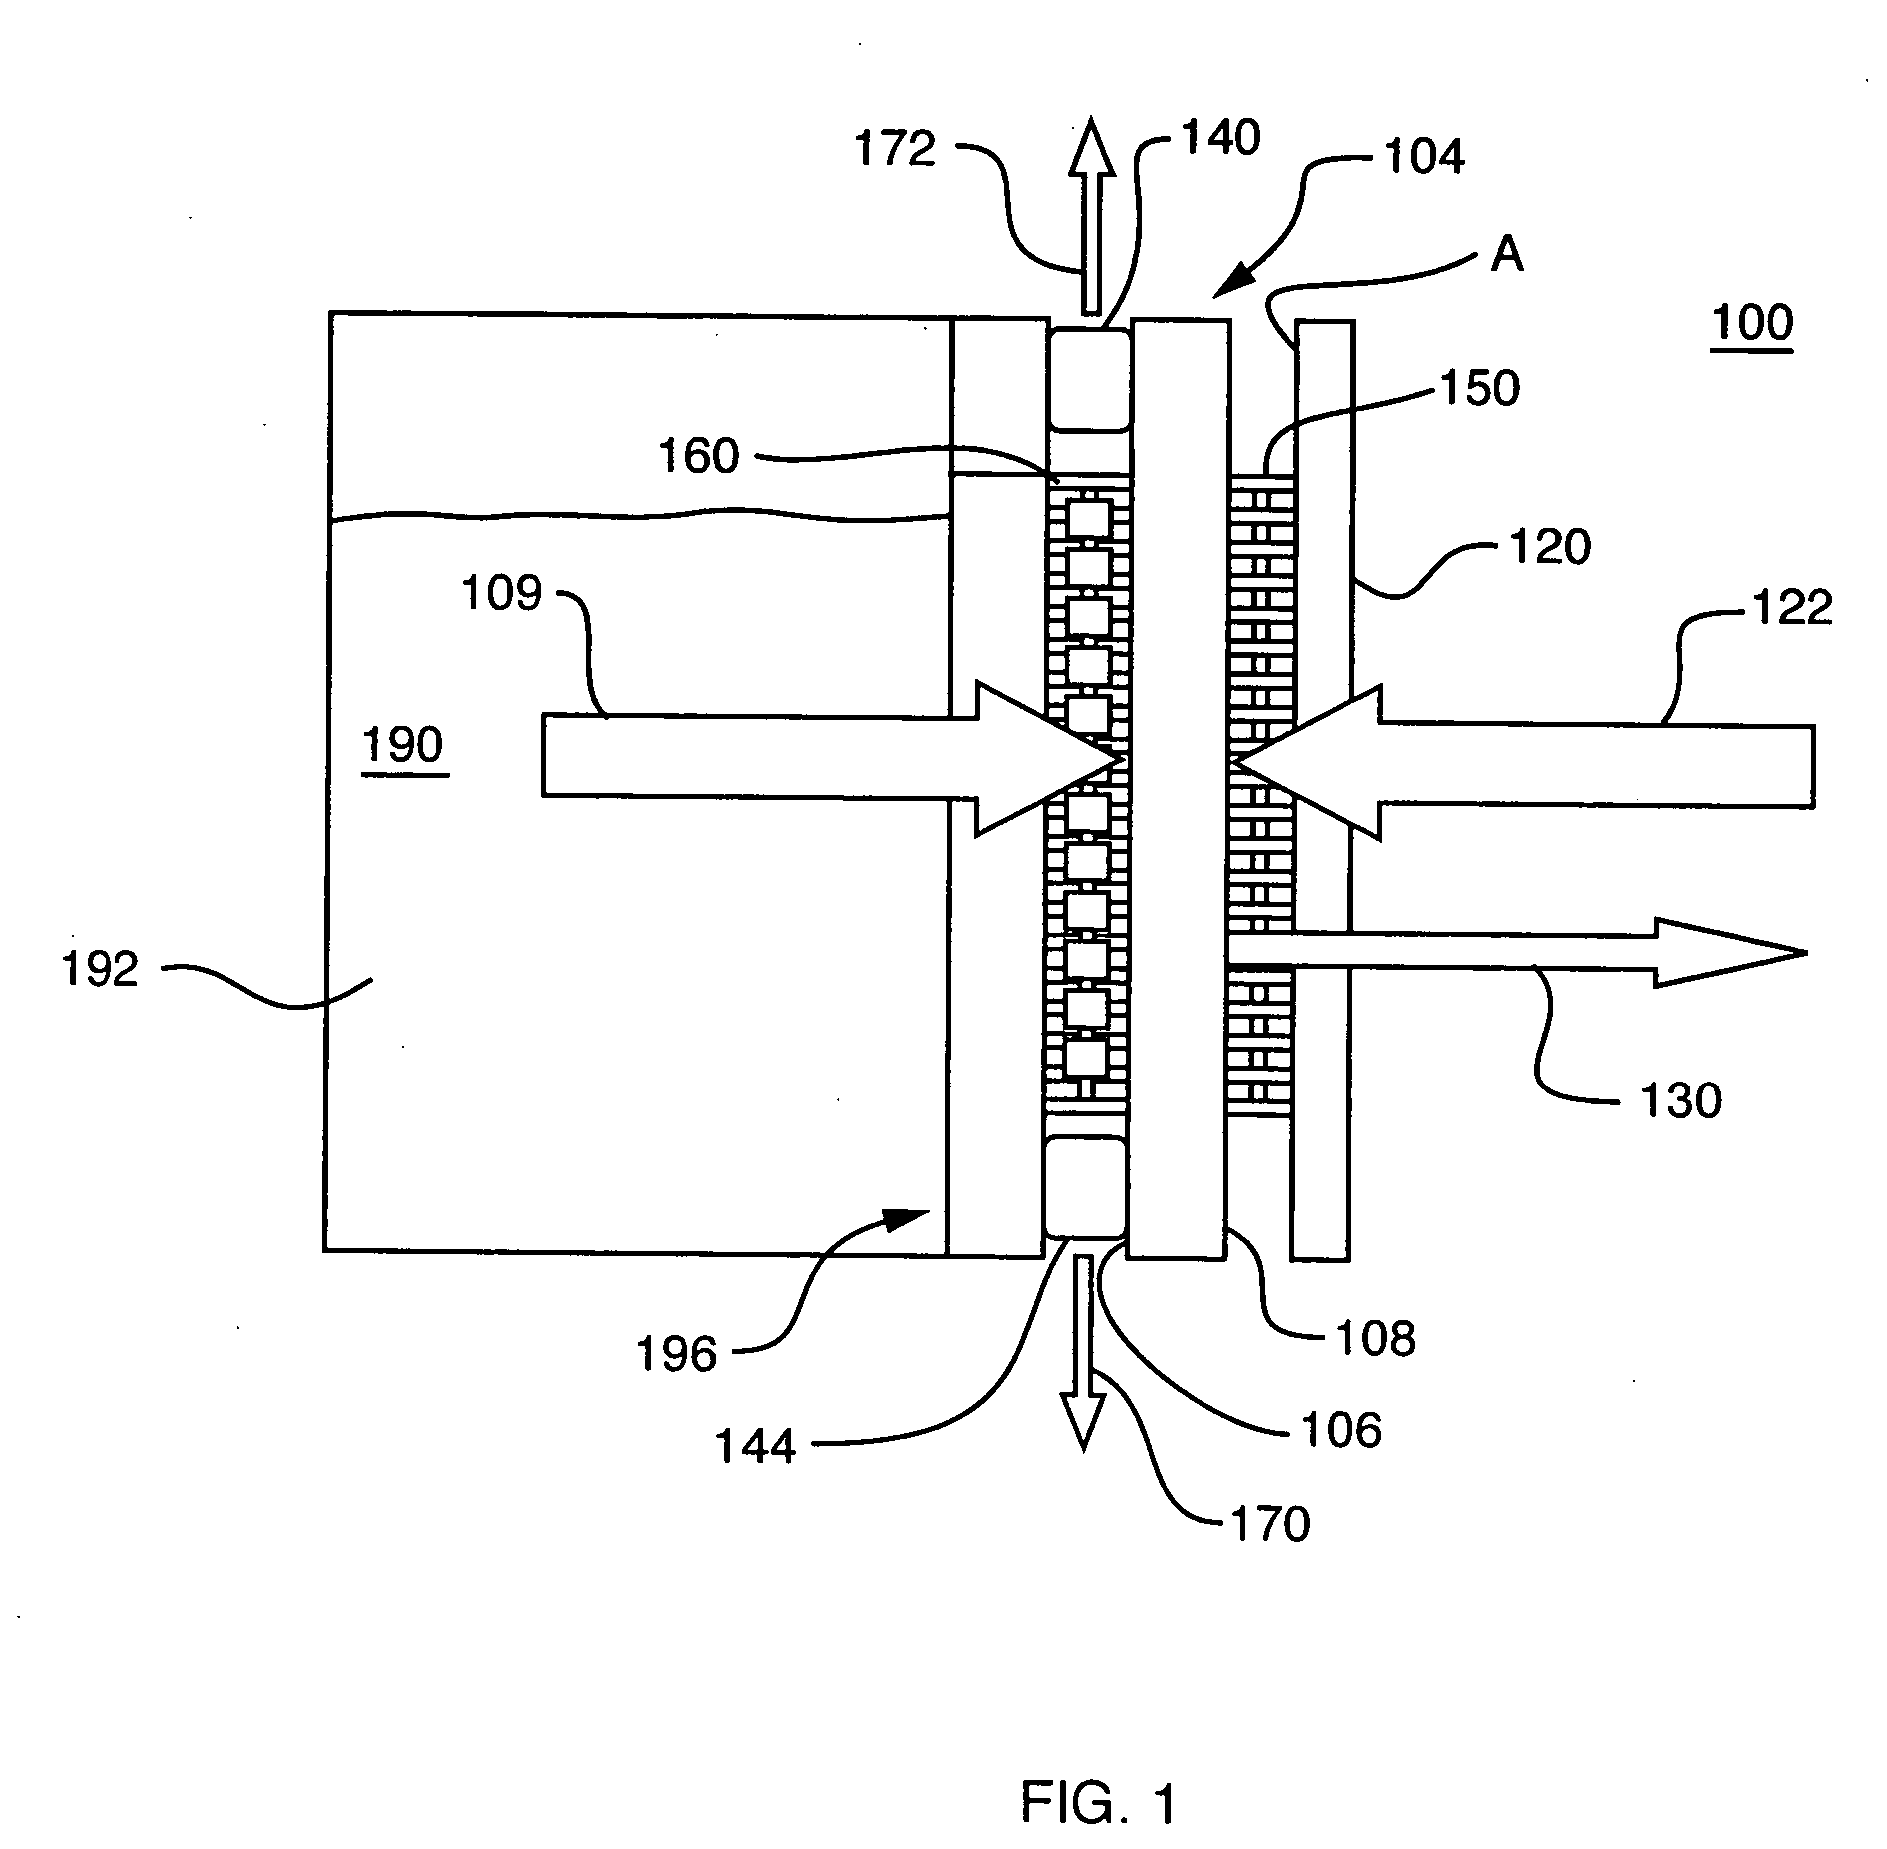 Fuel formulation for direct methanol fuel cell